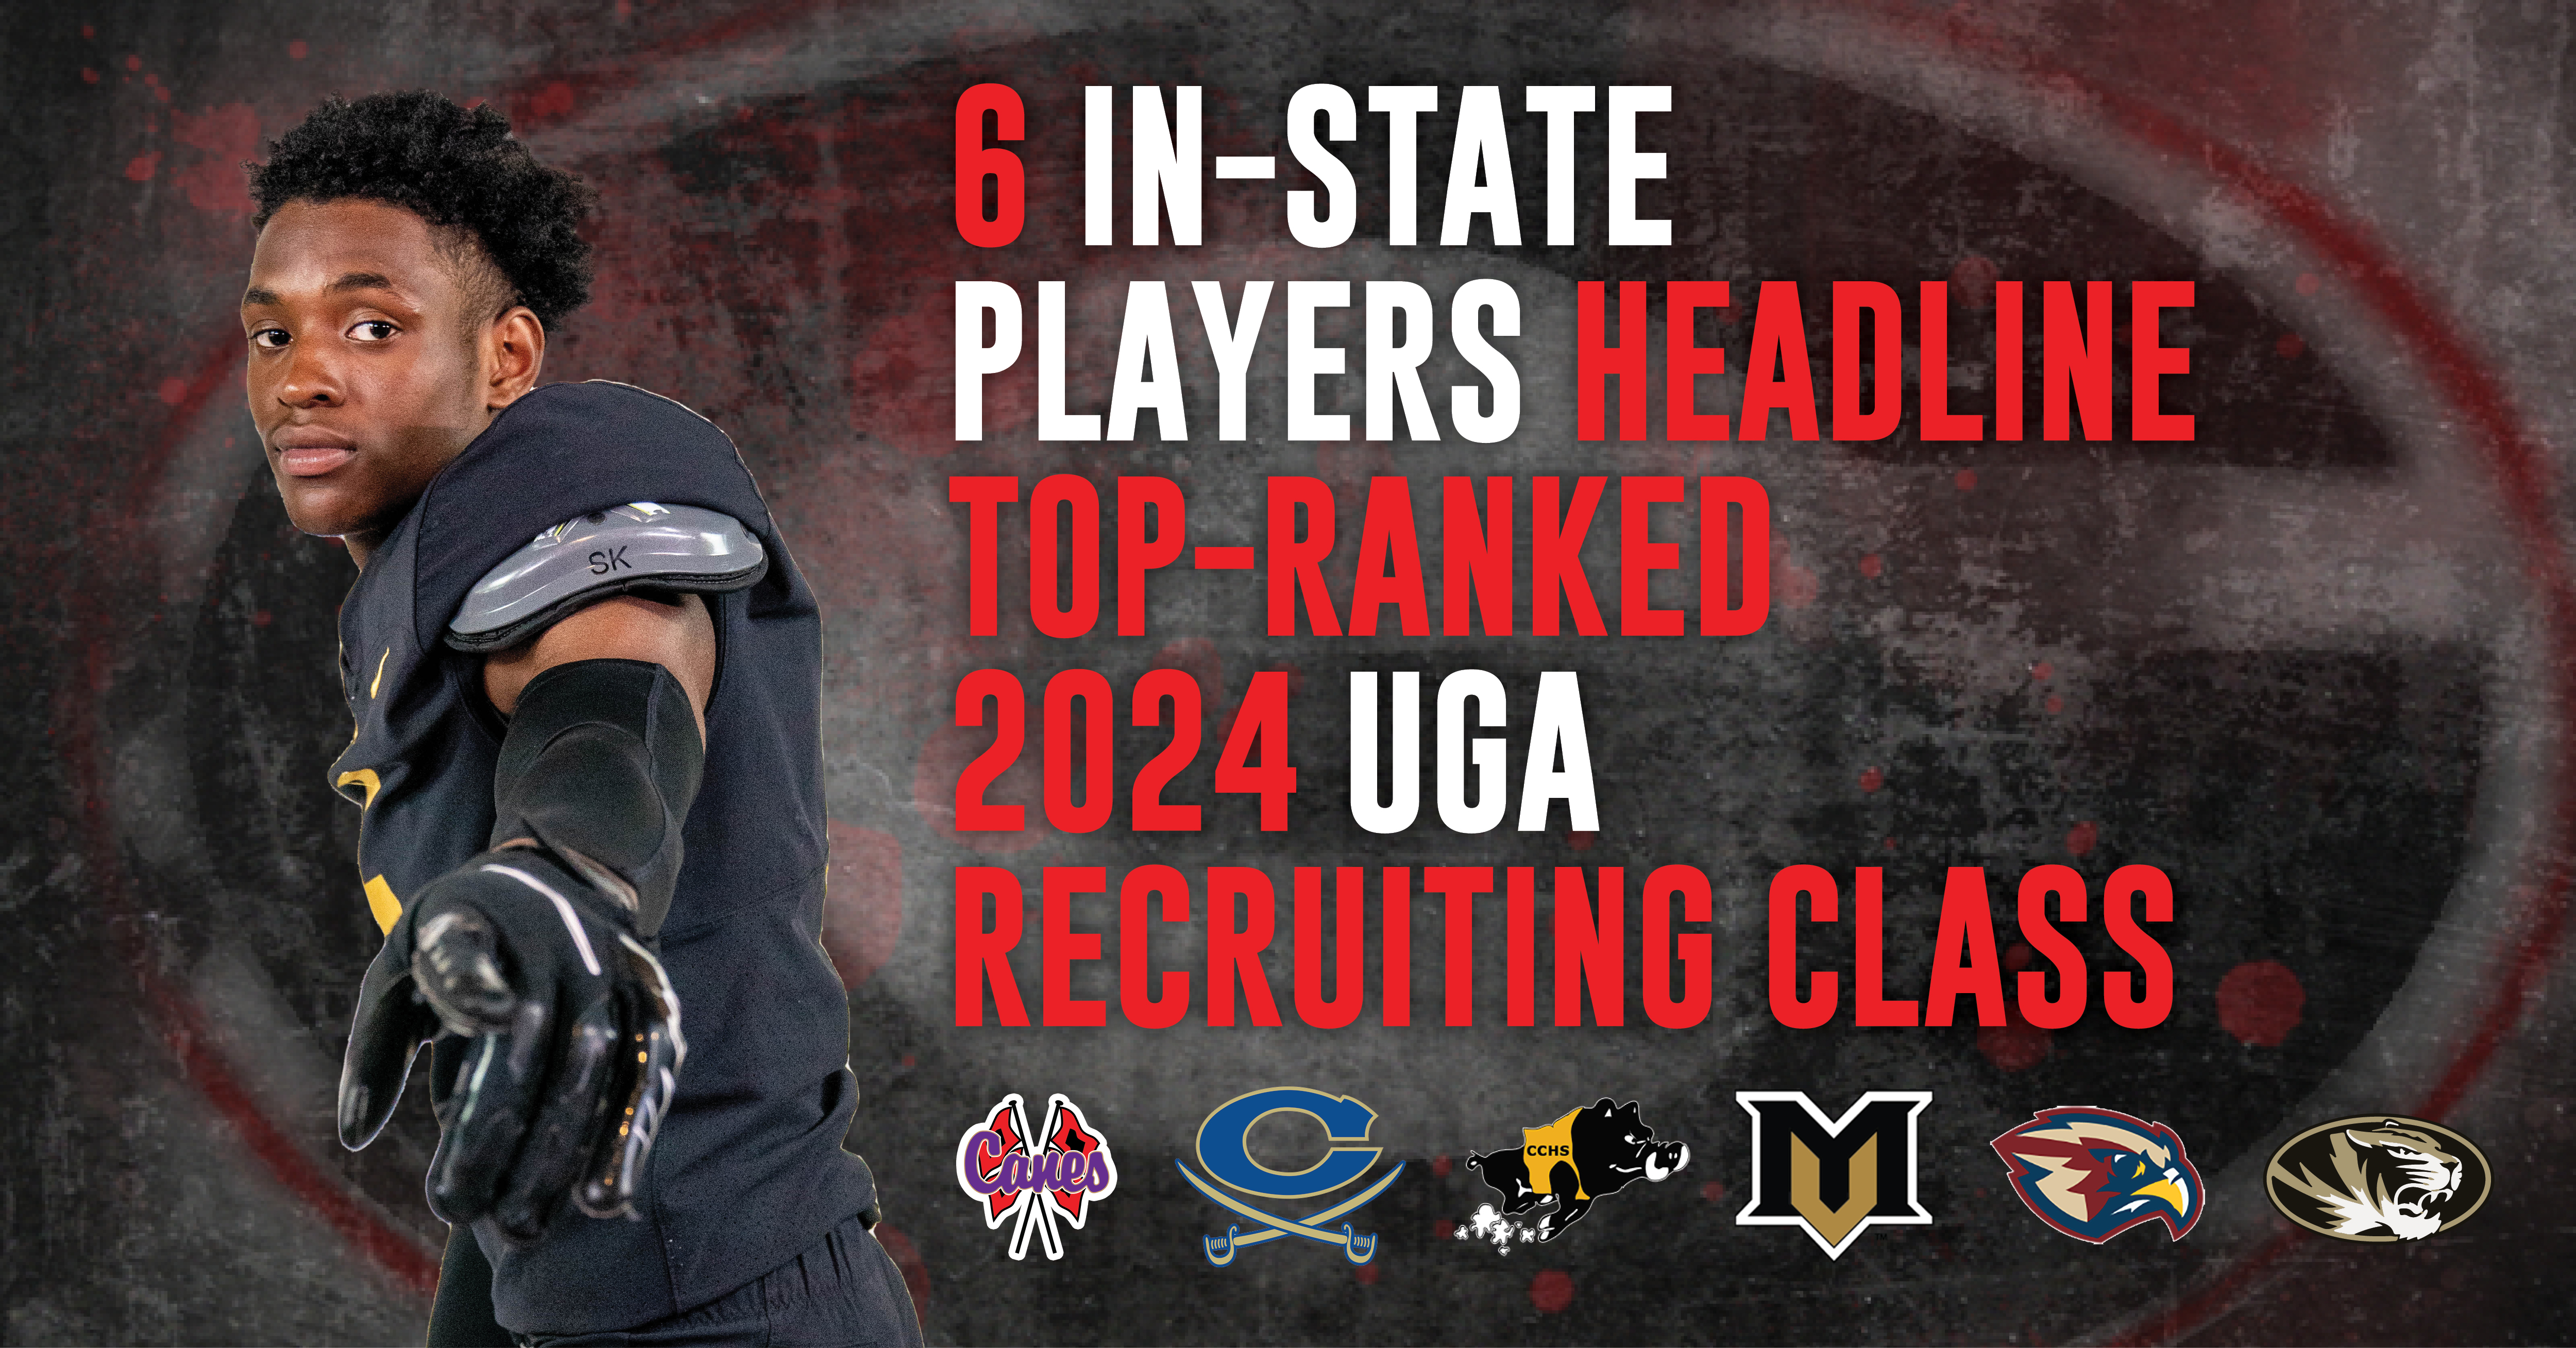 6 In-State Players Headline Top-Ranked UGA 2024 Recruiting Class - ITG Next